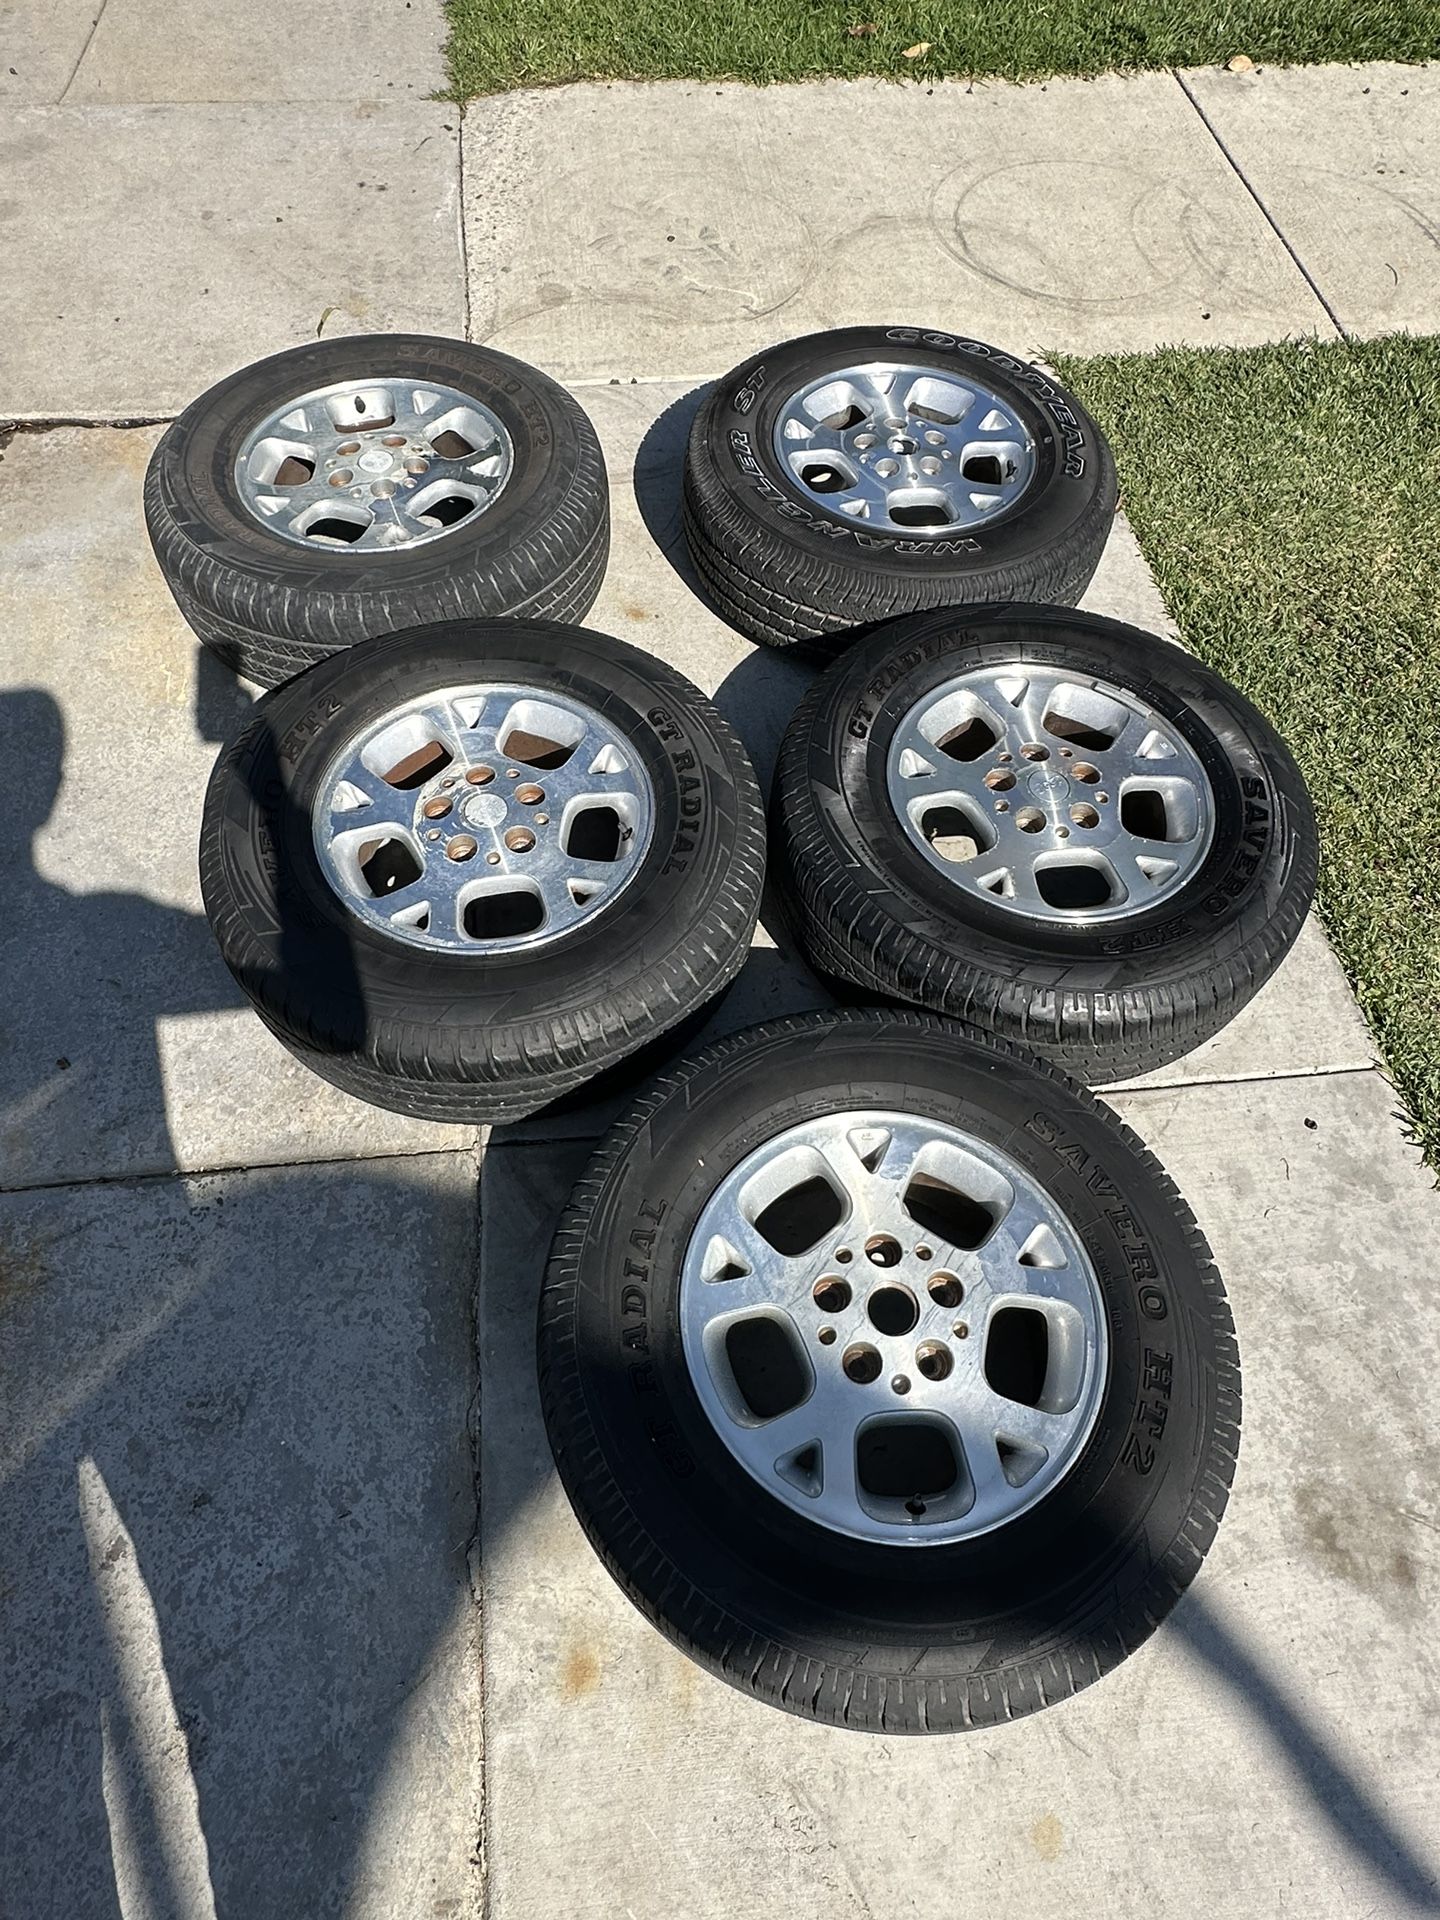 Jeep Cherokee Wrangler Wheels And Tires 245/70 R16